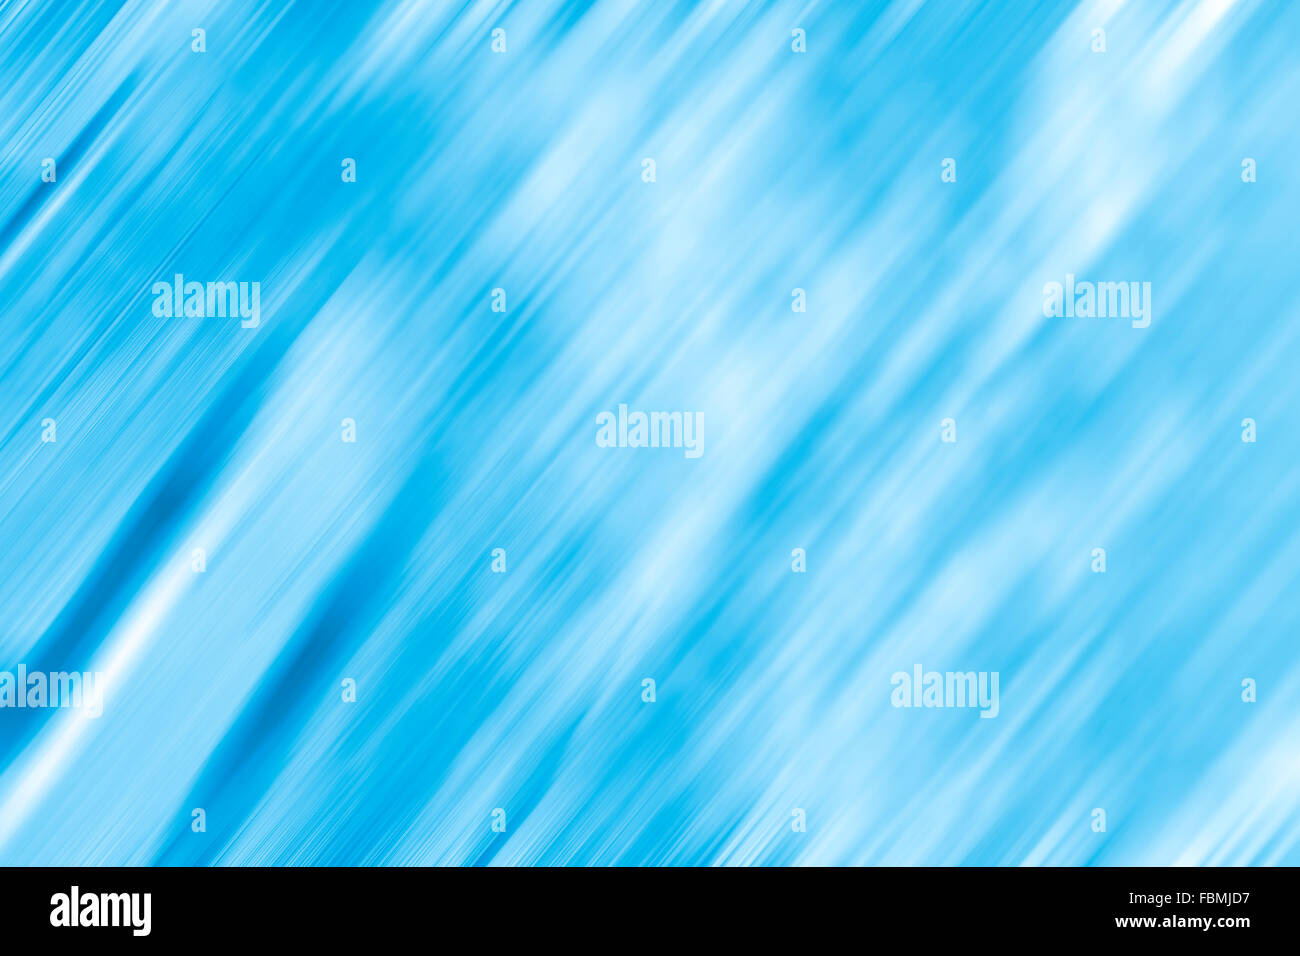 Motion blurred modern blue abstract background. Stock Photo